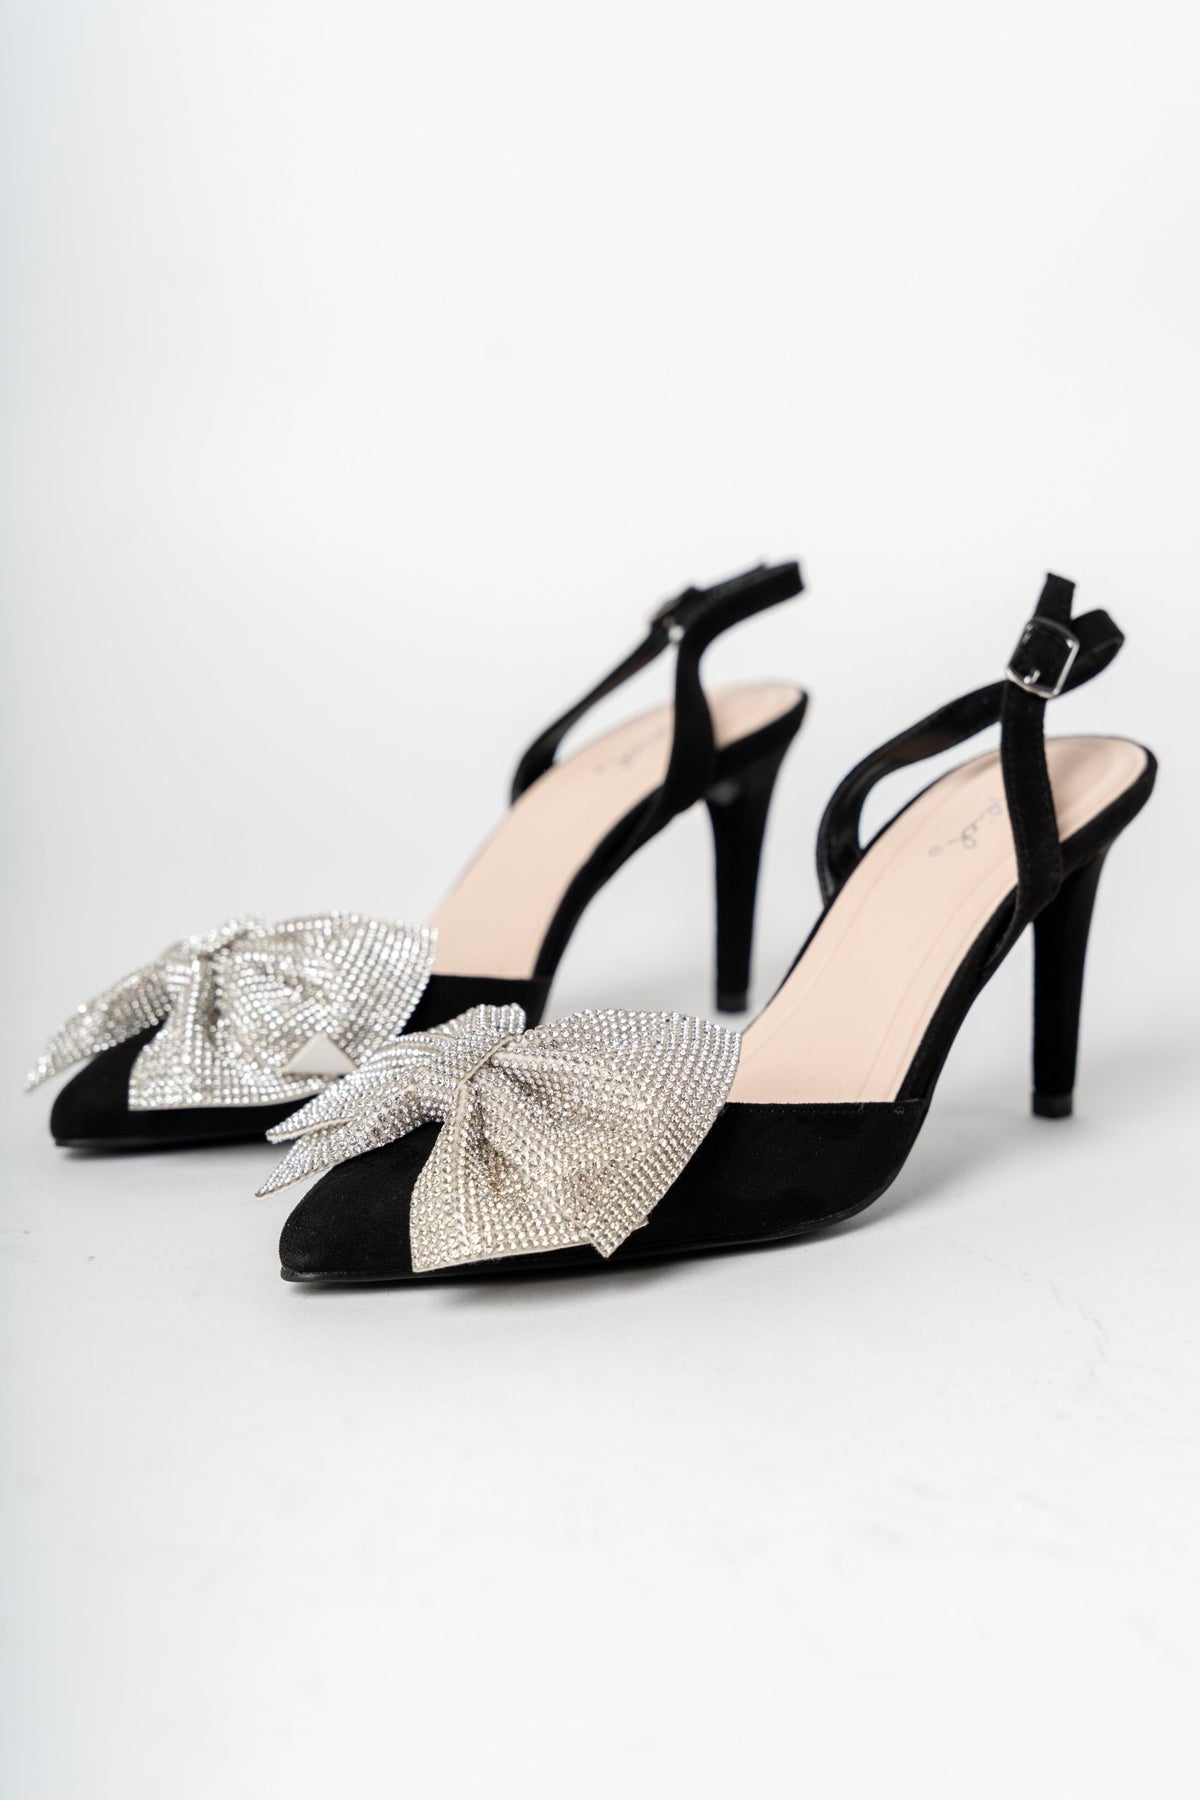 Trinee rhinestone bow heel black - Cute shoes - Trendy Shoes at Lush Fashion Lounge Boutique in Oklahoma City